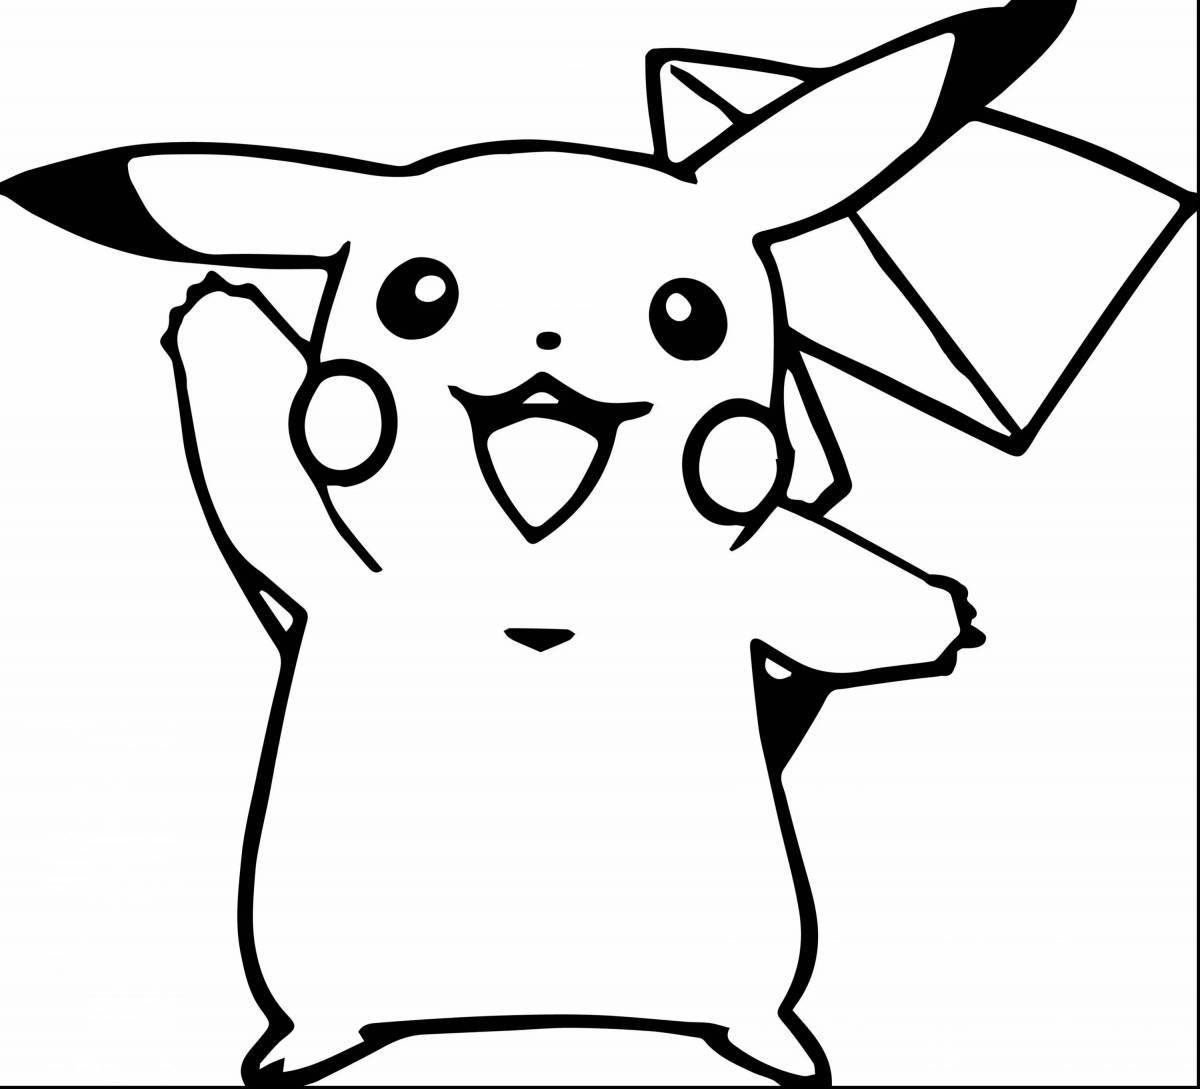 Cute pikachu and pokeball coloring page